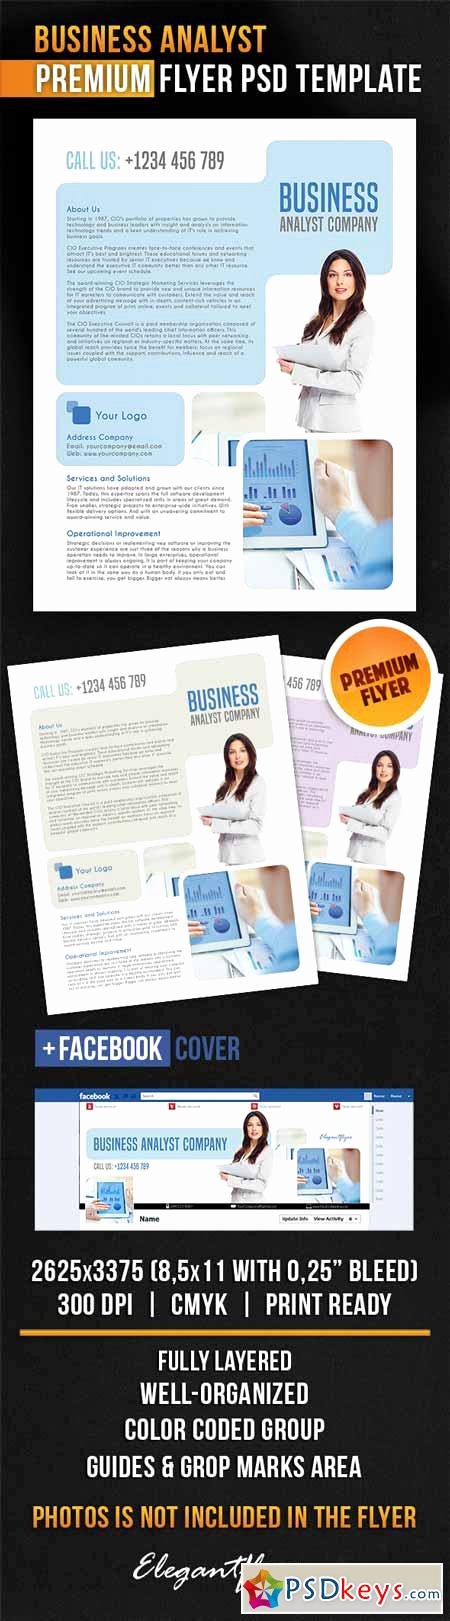 Facebook Ad Template Psd Elegant Business Analyst – Flyer Psd Template Cover